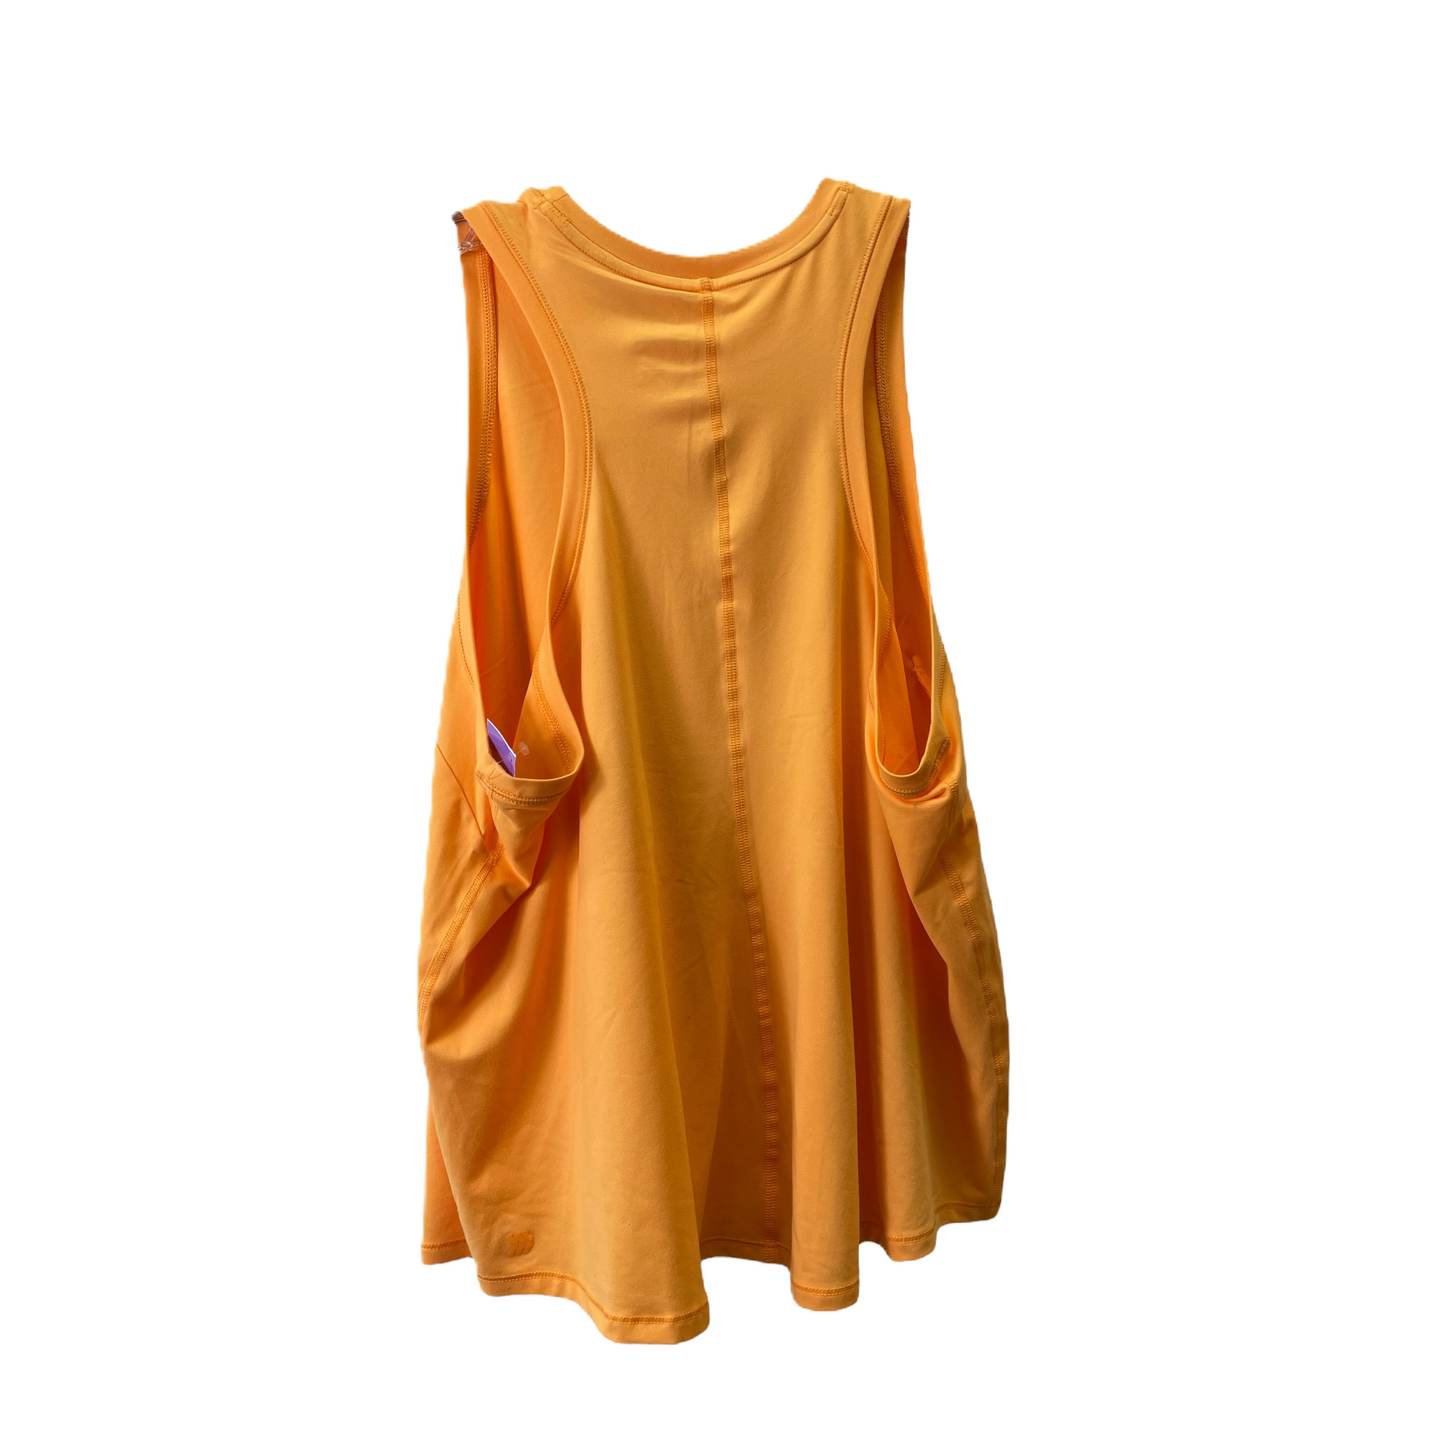 Orange Tank Top By All In Motion, Size: 1x